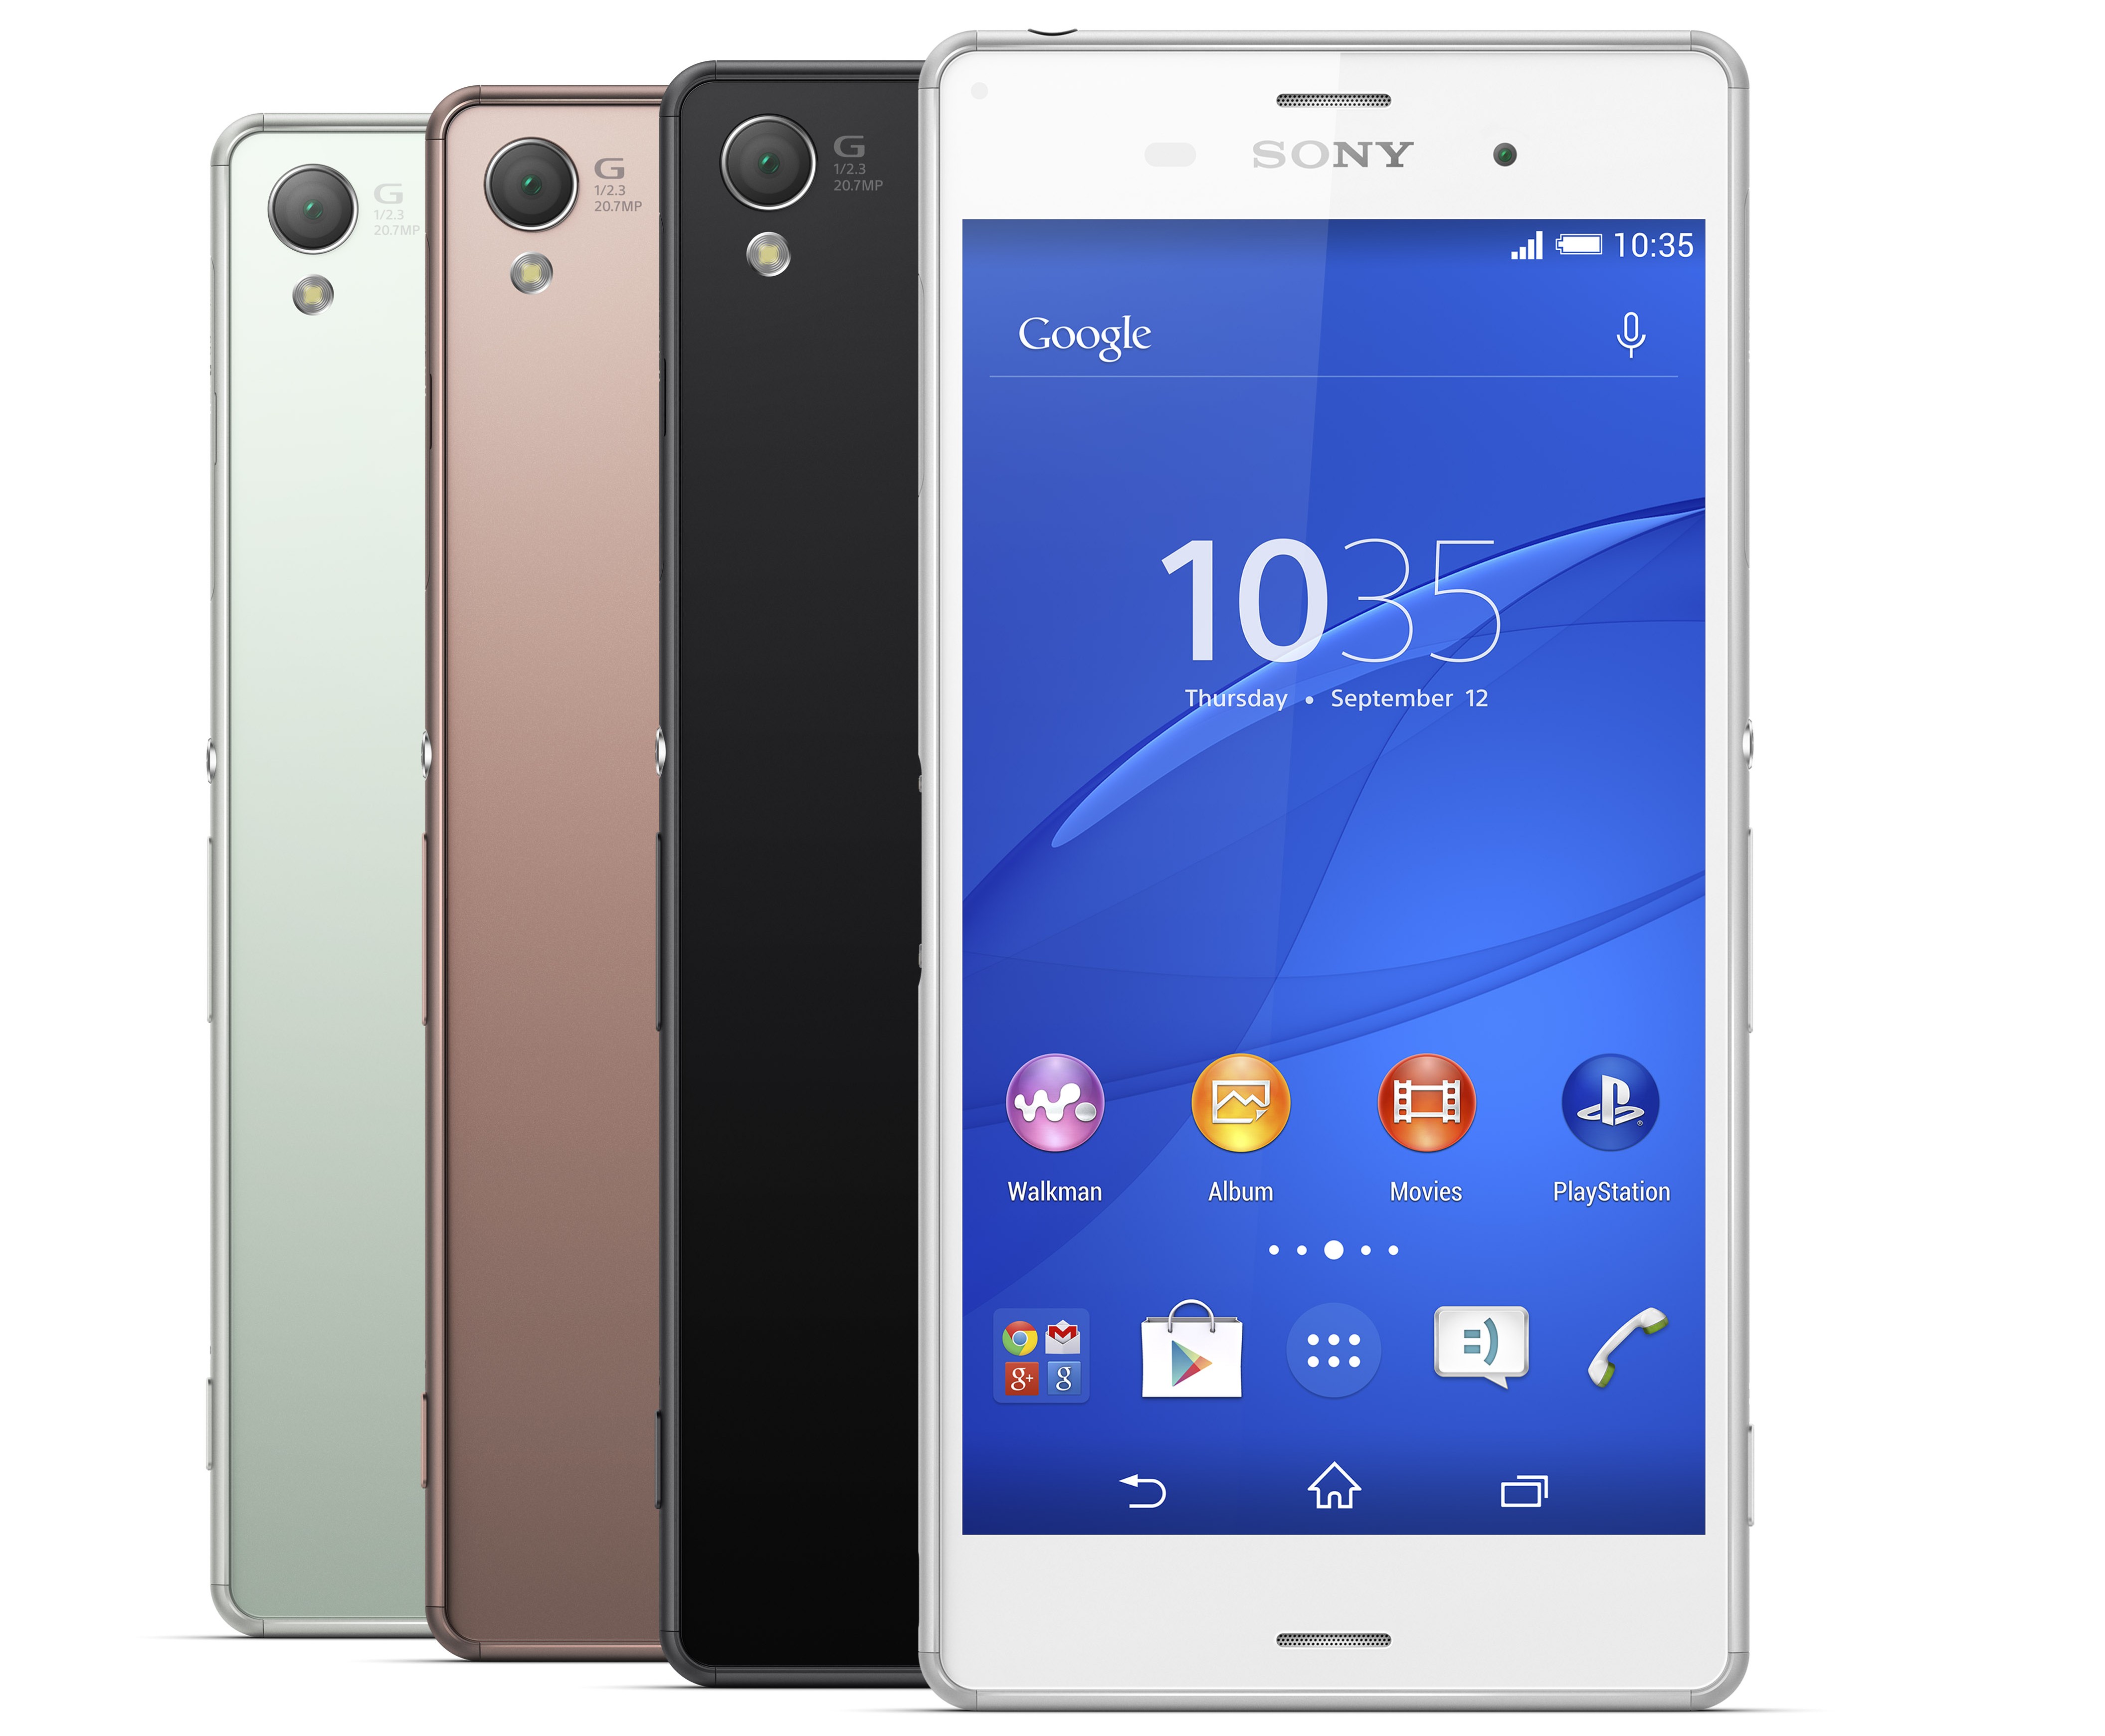 Sony Xperia Z3+ and Z3+ Dual now receiving Android 7.0 Nougat